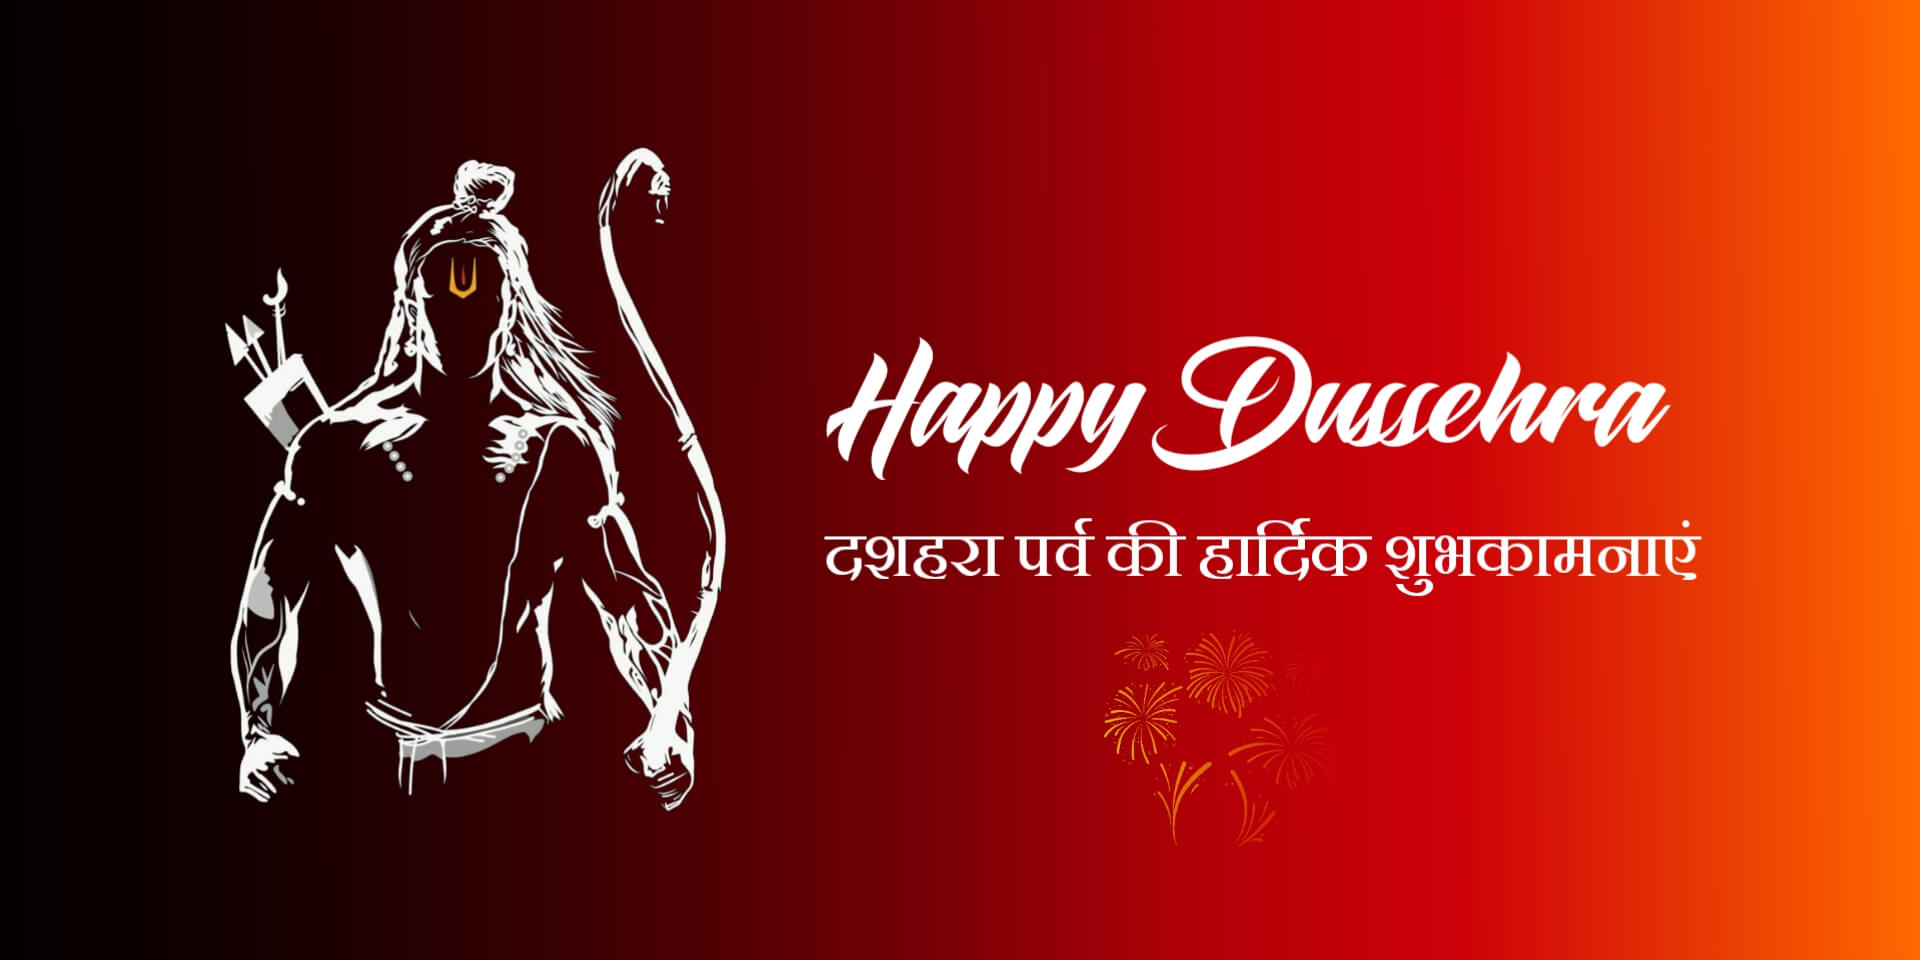 2022 Happy Dussehra Wishes, Images, Quotes and Messages